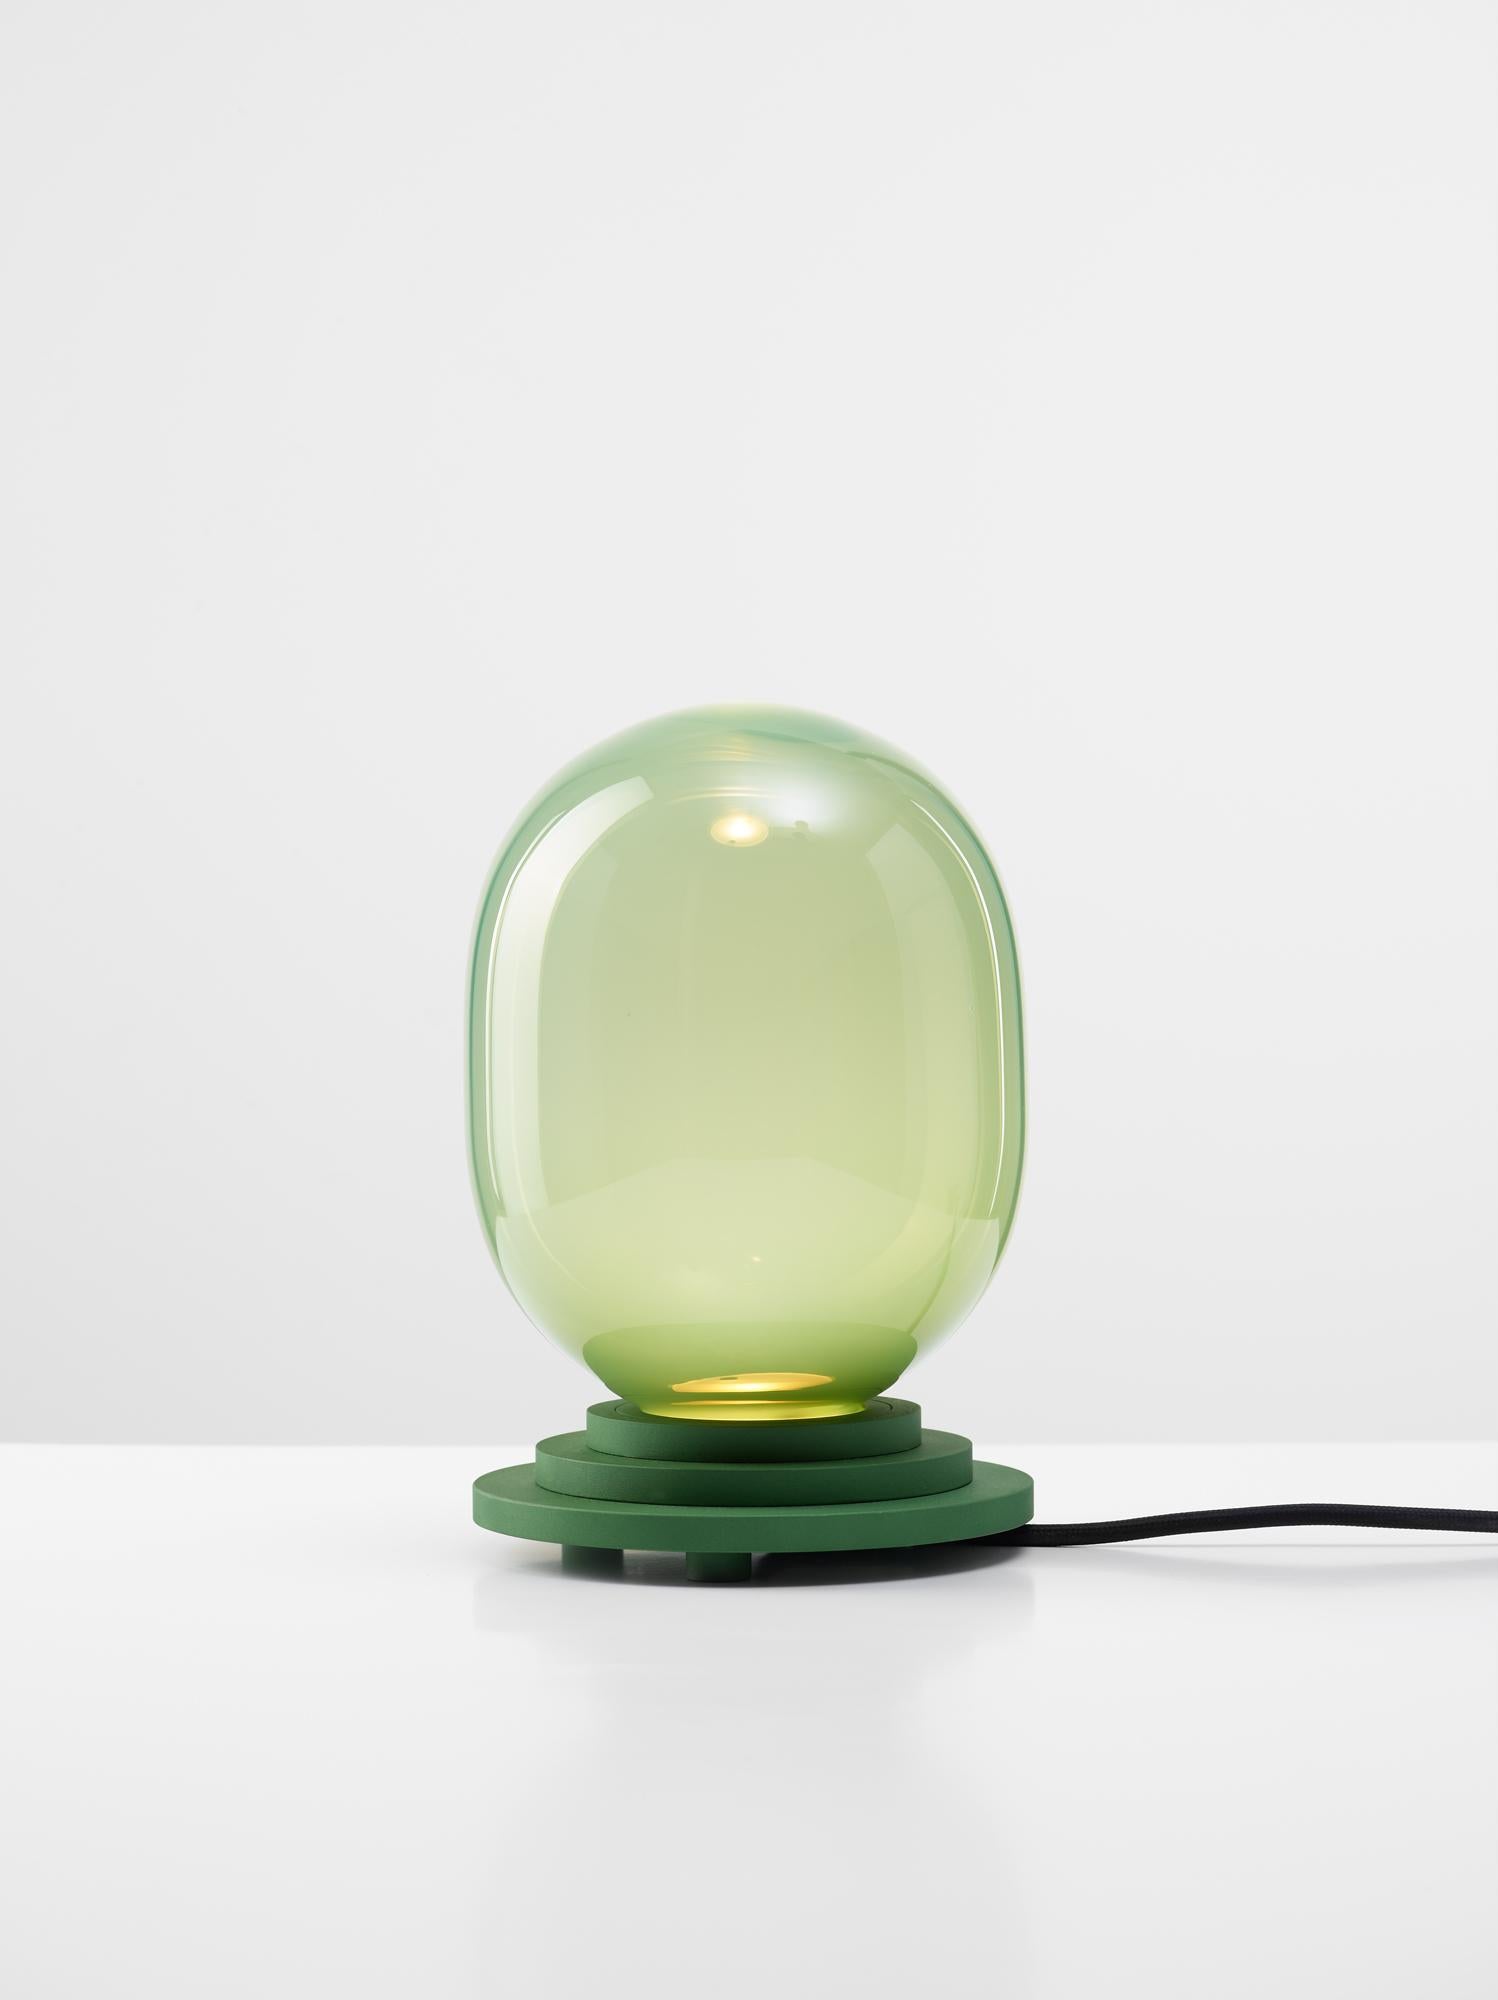 Set of 2 green stratos capsule table light by Dechem Studio.
Dimensions: D 15 x H 22 cm
Materials: aluminum, glass.
Also available: different colours available.

Different shapes of capsules and spheres contrast with anodized alloy fixtures,